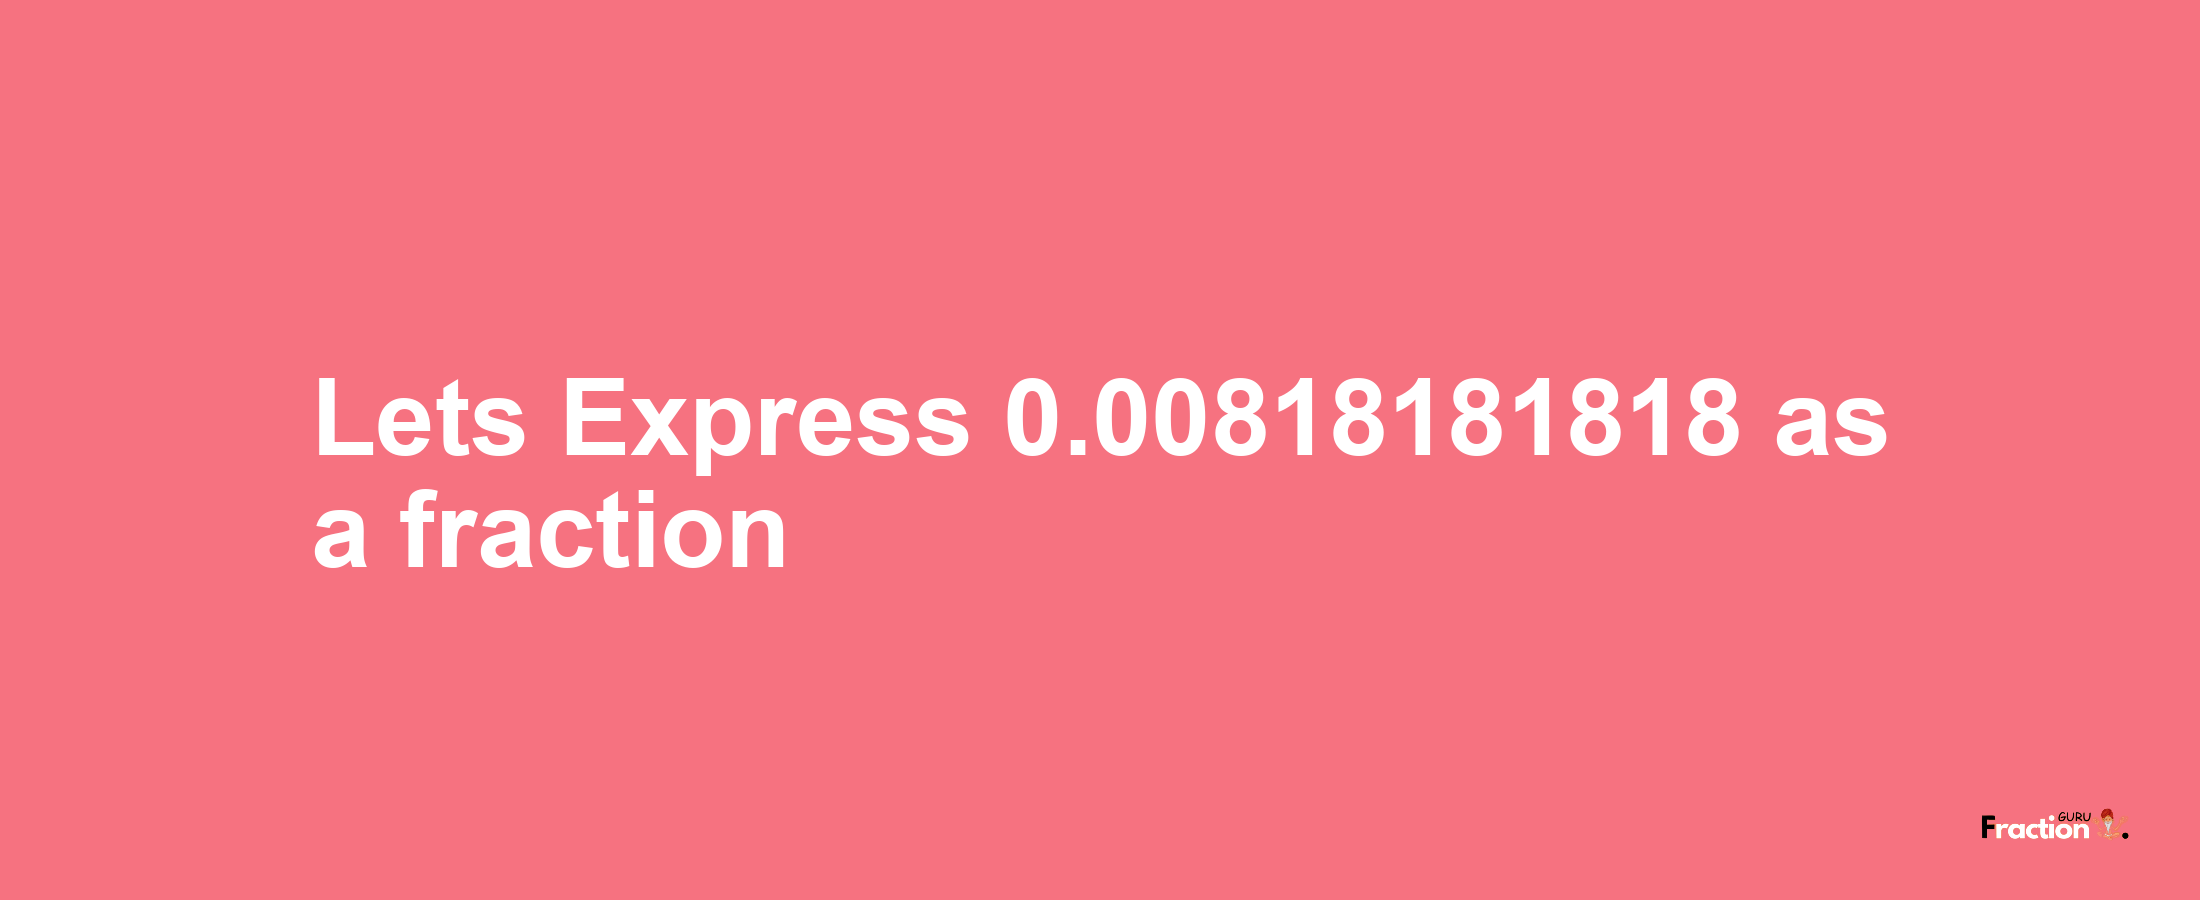 Lets Express 0.00818181818 as afraction